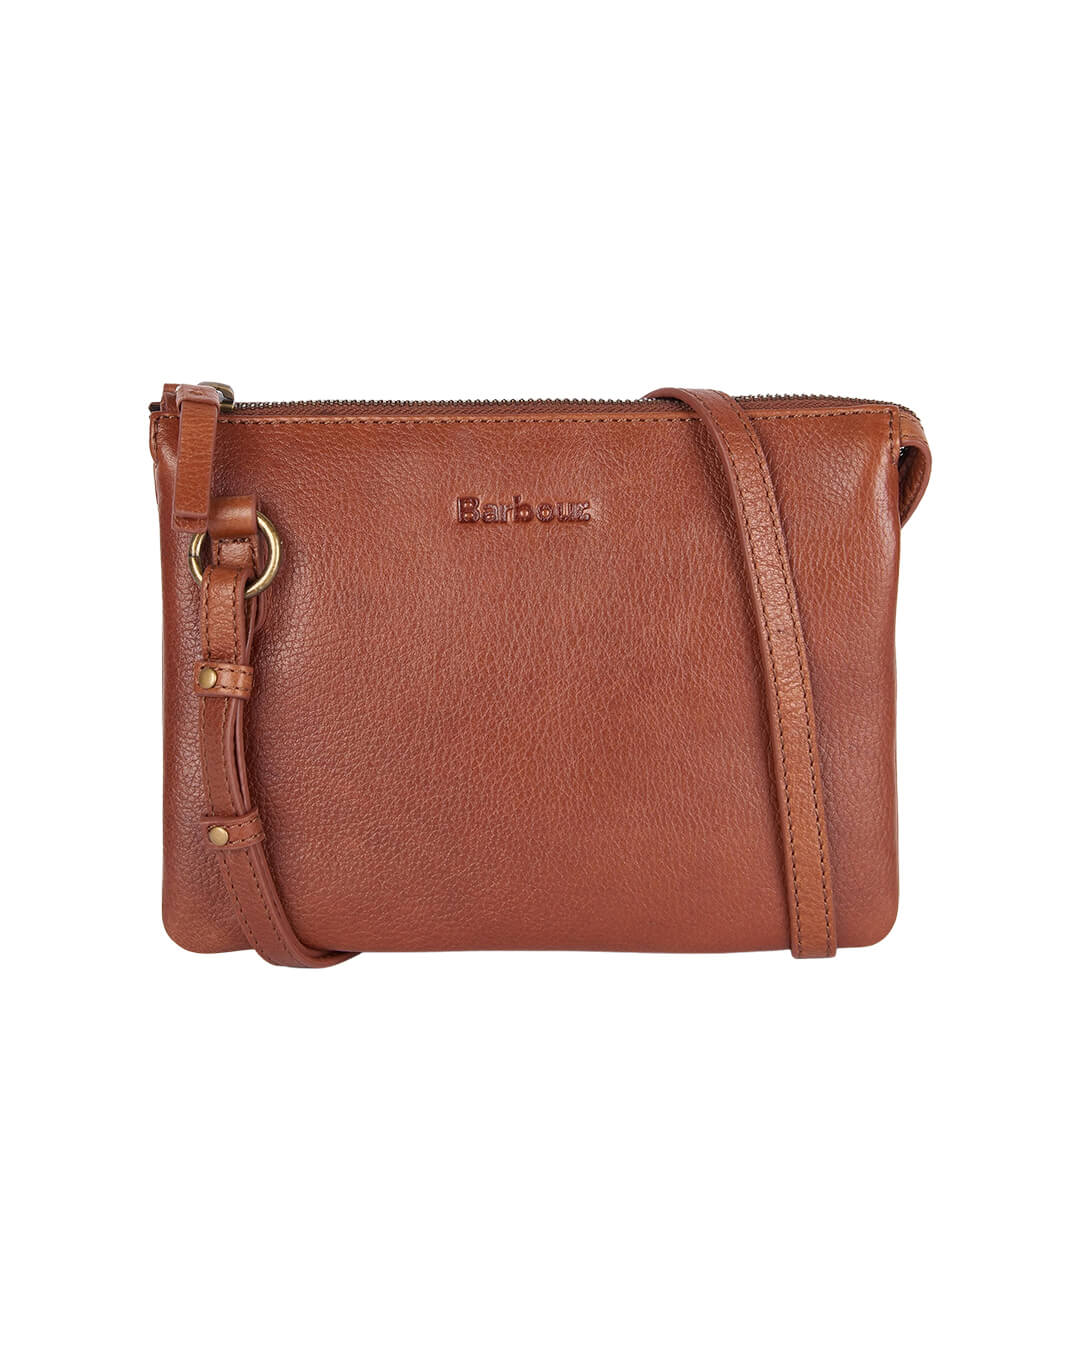 Barbour Bags ONE Barbour Lochy Brown Leather Crossbody Bag